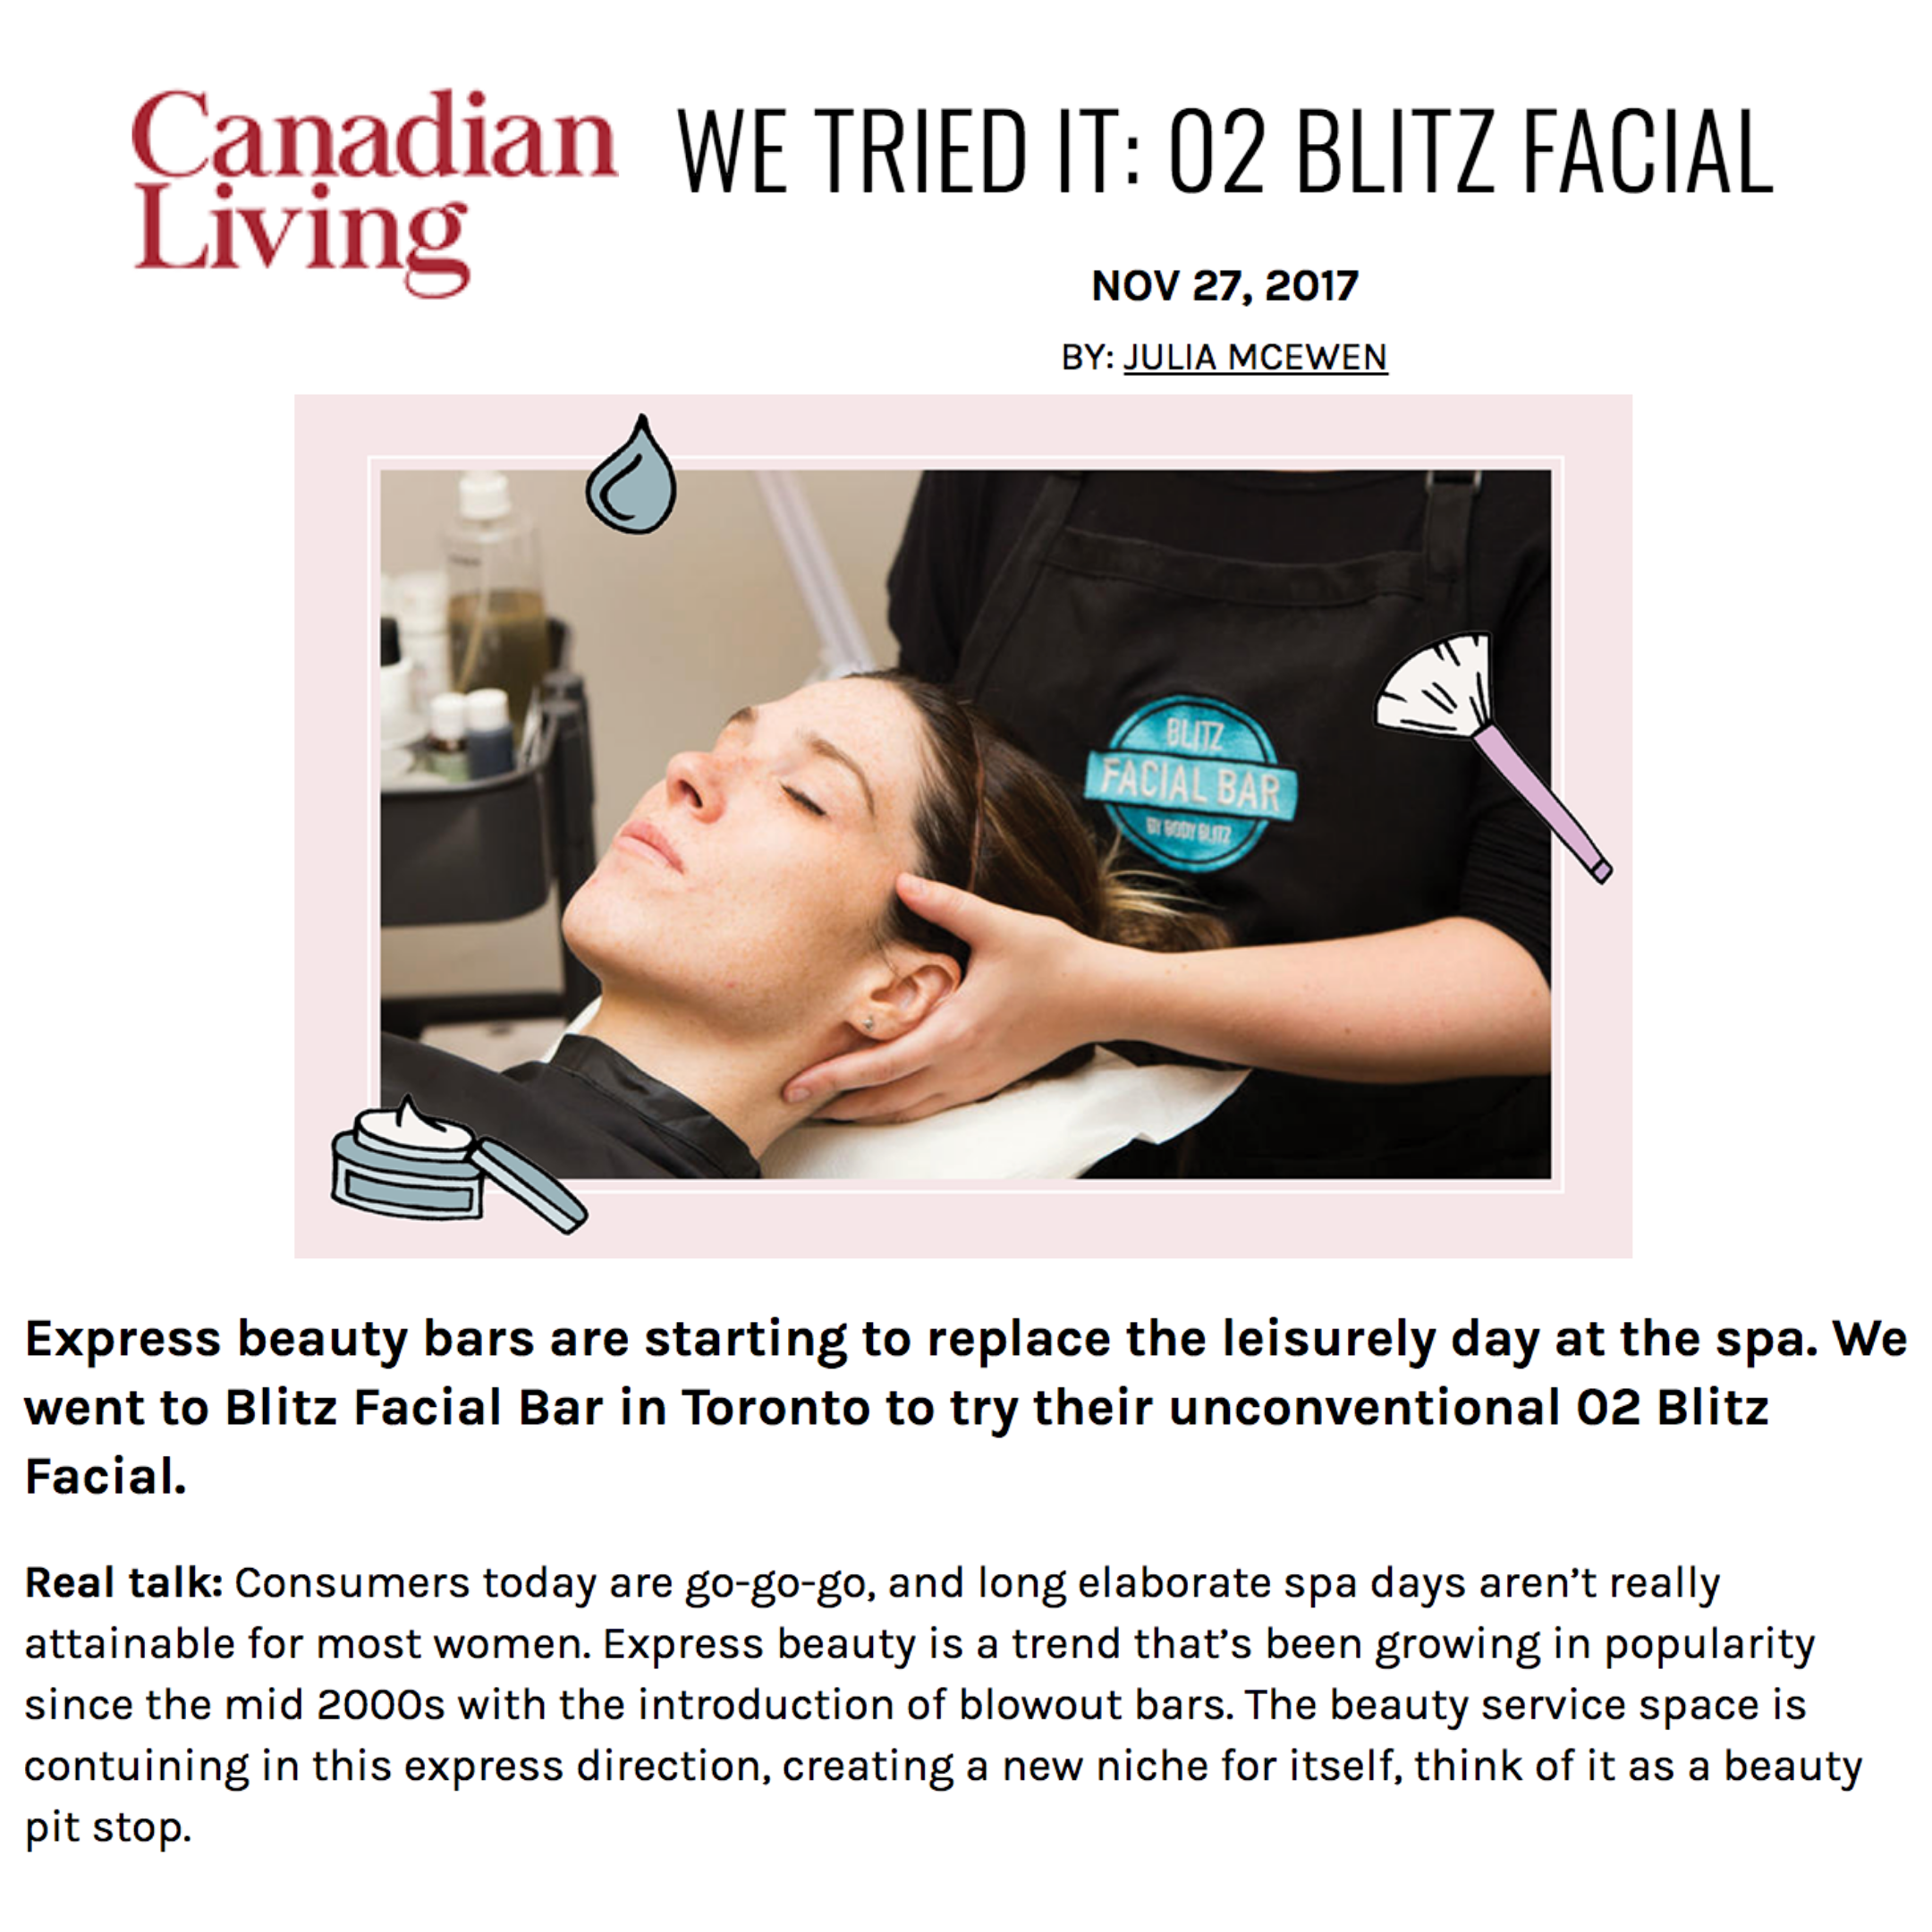 Canadian Living went to Blitz Facial Bar in Toronto to try their unconventional 02 Blitz Facial.